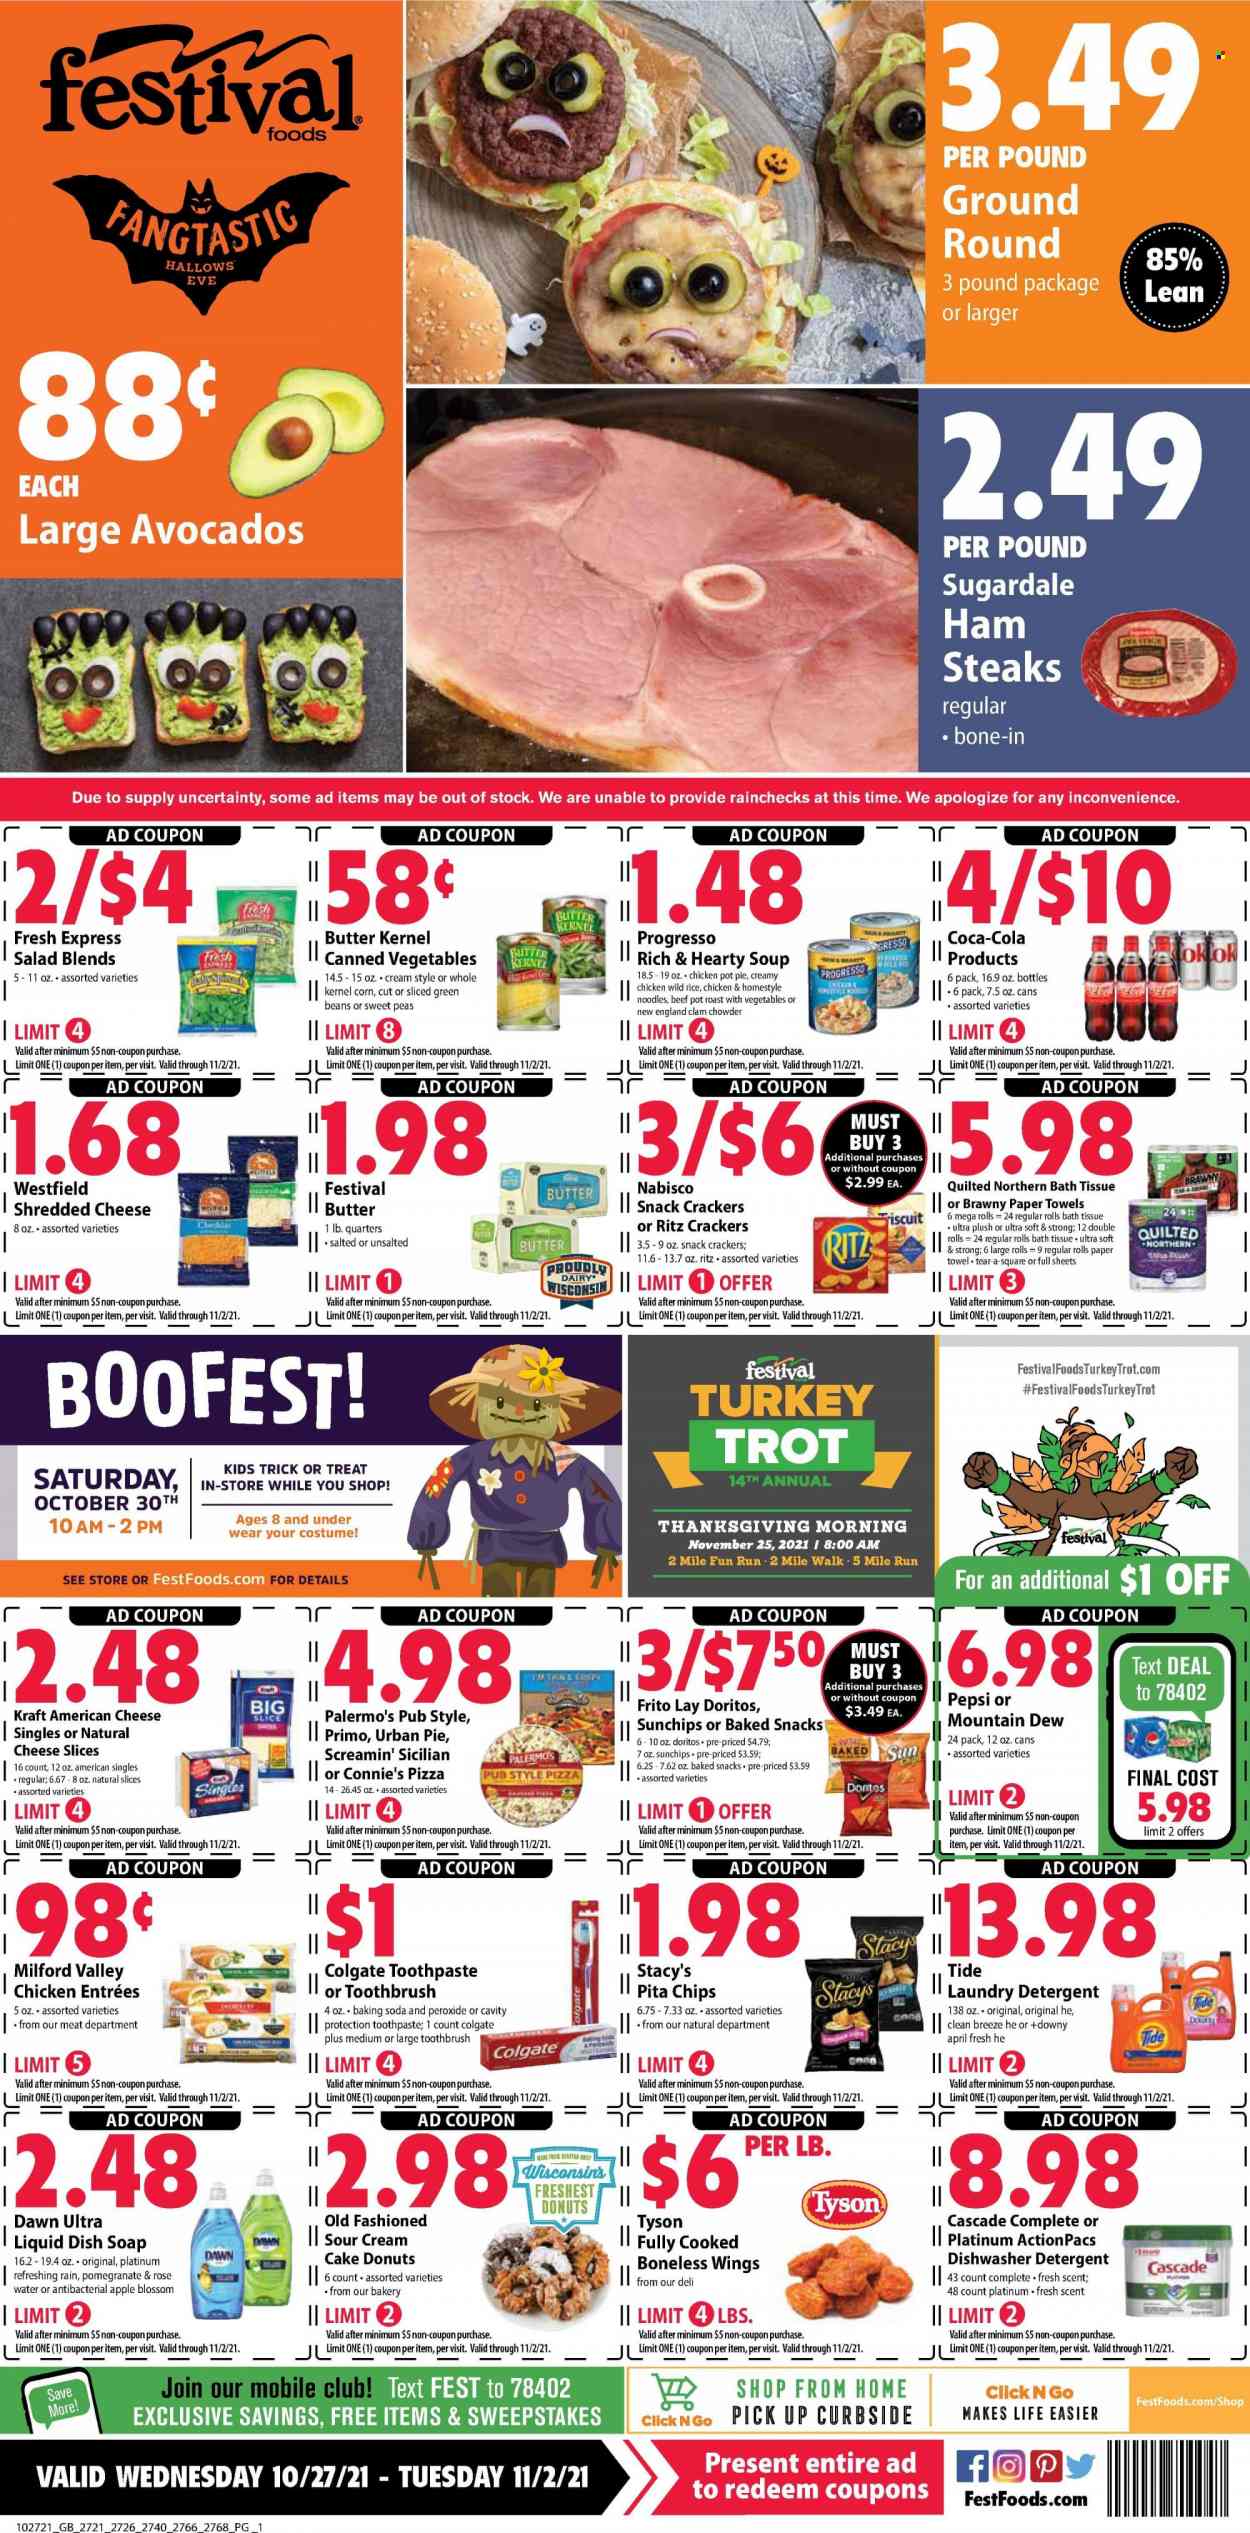 thumbnail - Festival Foods Flyer - 10/27/2021 - 11/02/2021 - Sales products - pot pie, donut, beans, corn, green beans, peas, salad, pizza, soup, Urban Pie, noodles, Progresso, Kraft®, Sugardale, ham, ham steaks, american cheese, shredded cheese, sliced cheese, butter, Blossom, sour cream, Screamin' Sicilian, snack, crackers, RITZ, Doritos, chips, pita chips, bicarbonate of soda, canned vegetables, clam chowder, Coca-Cola, Mountain Dew, Pepsi, wine, rosé wine, steak, bath tissue, Quilted Northern, kitchen towels, paper towels, detergent, Cascade, Tide, laundry detergent, soap, Colgate, toothbrush, toothpaste, pomegranate. Page 1.